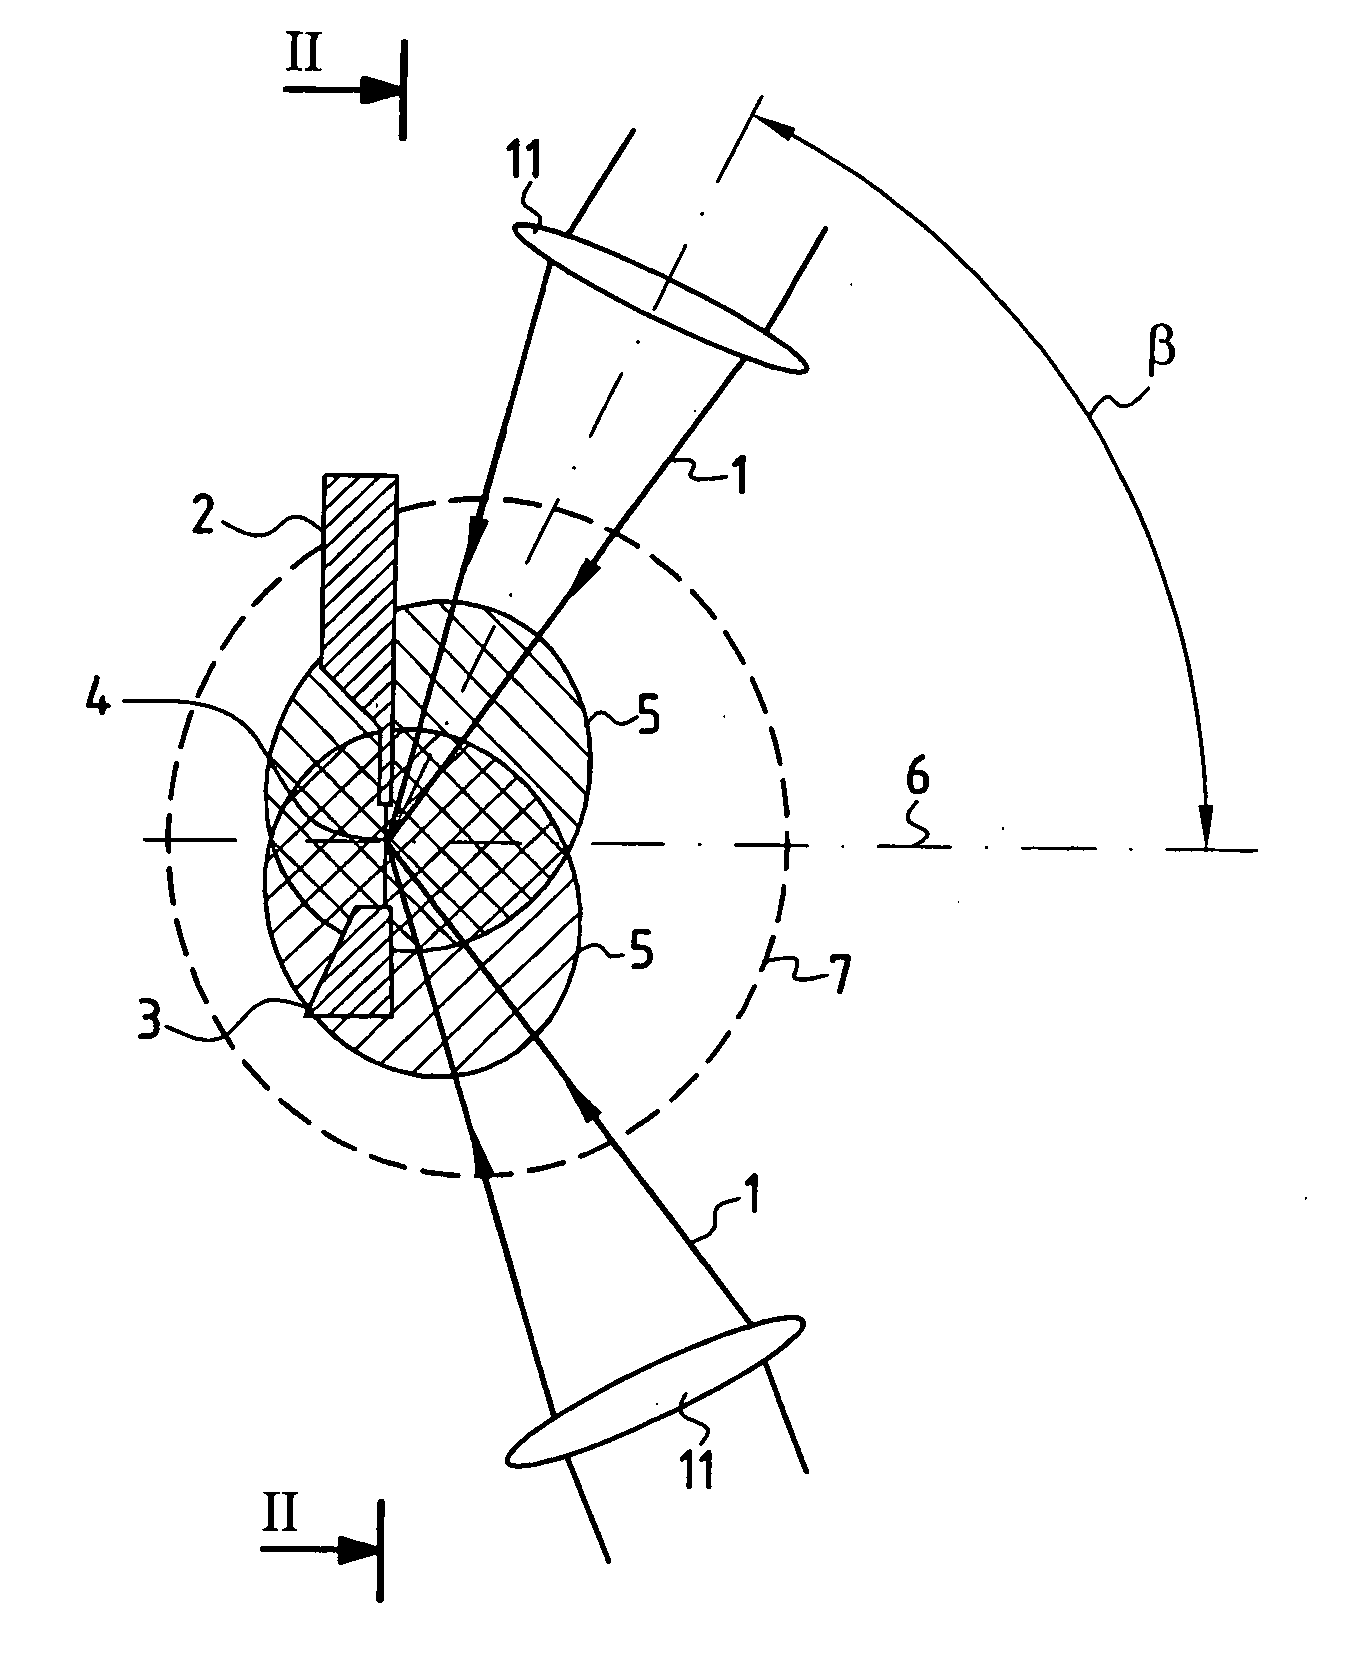 Apparatus for generating light in the extreme ultraviolet and use in a light source for extreme ultraviolet lithography